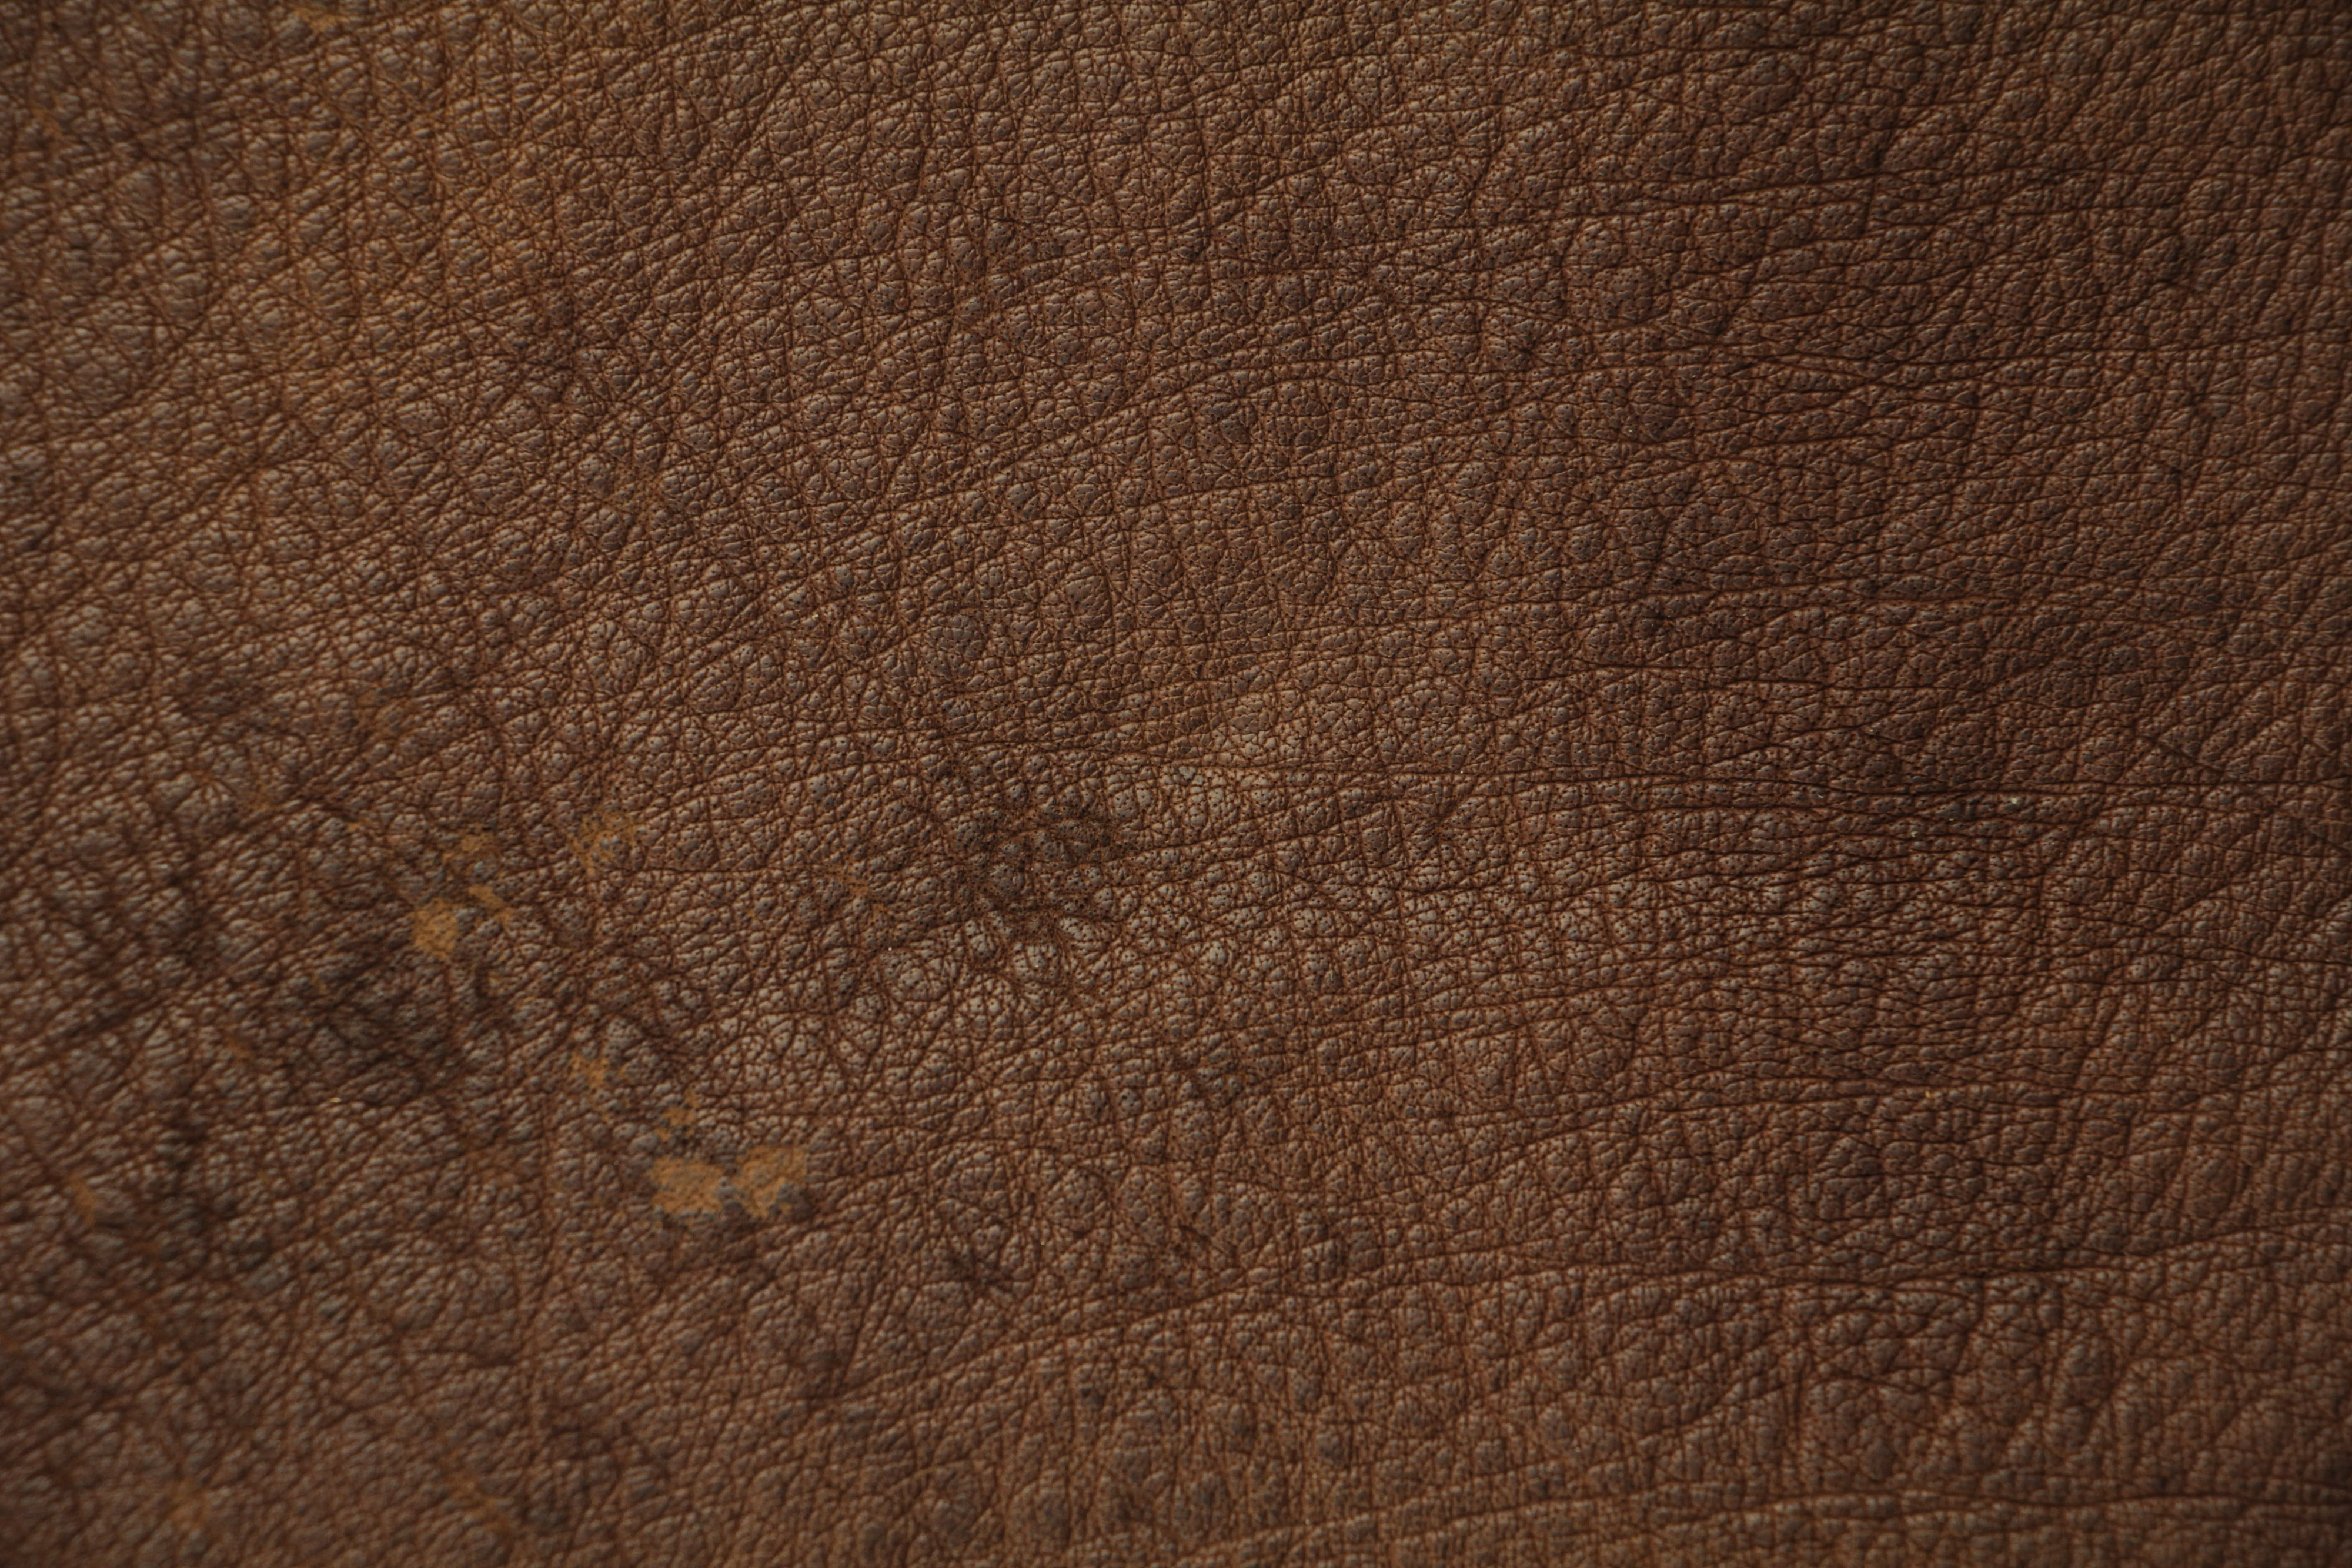 Brown leather tumbled